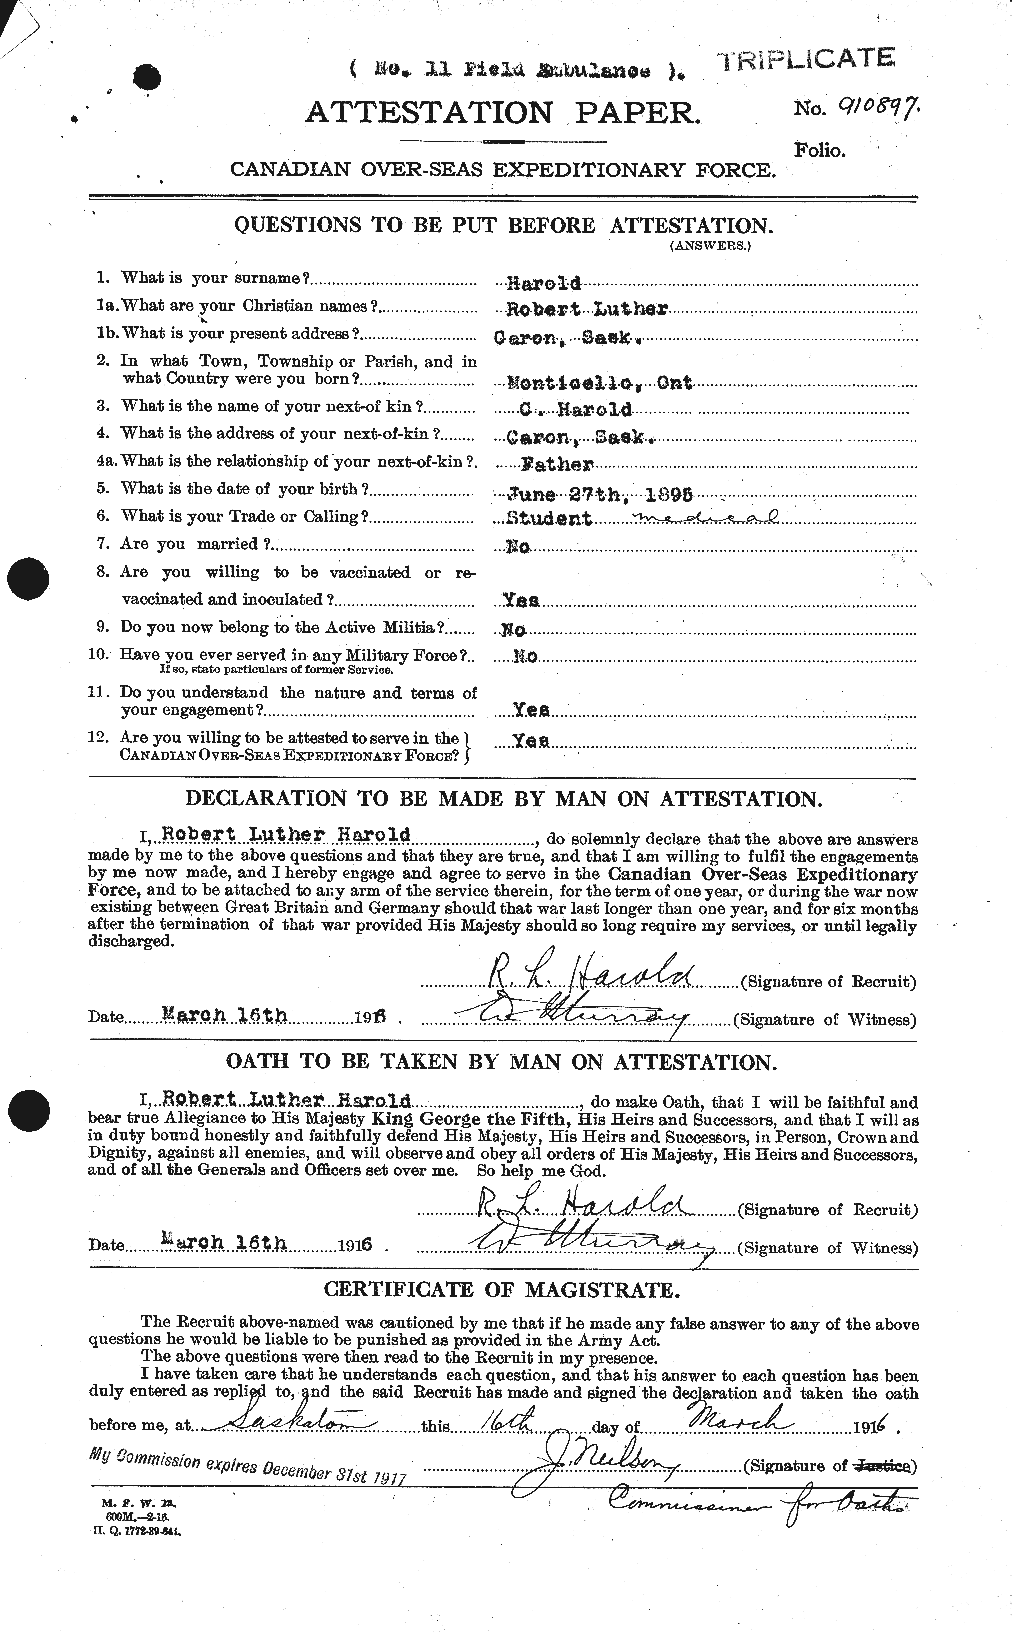 Personnel Records of the First World War - CEF 380732a